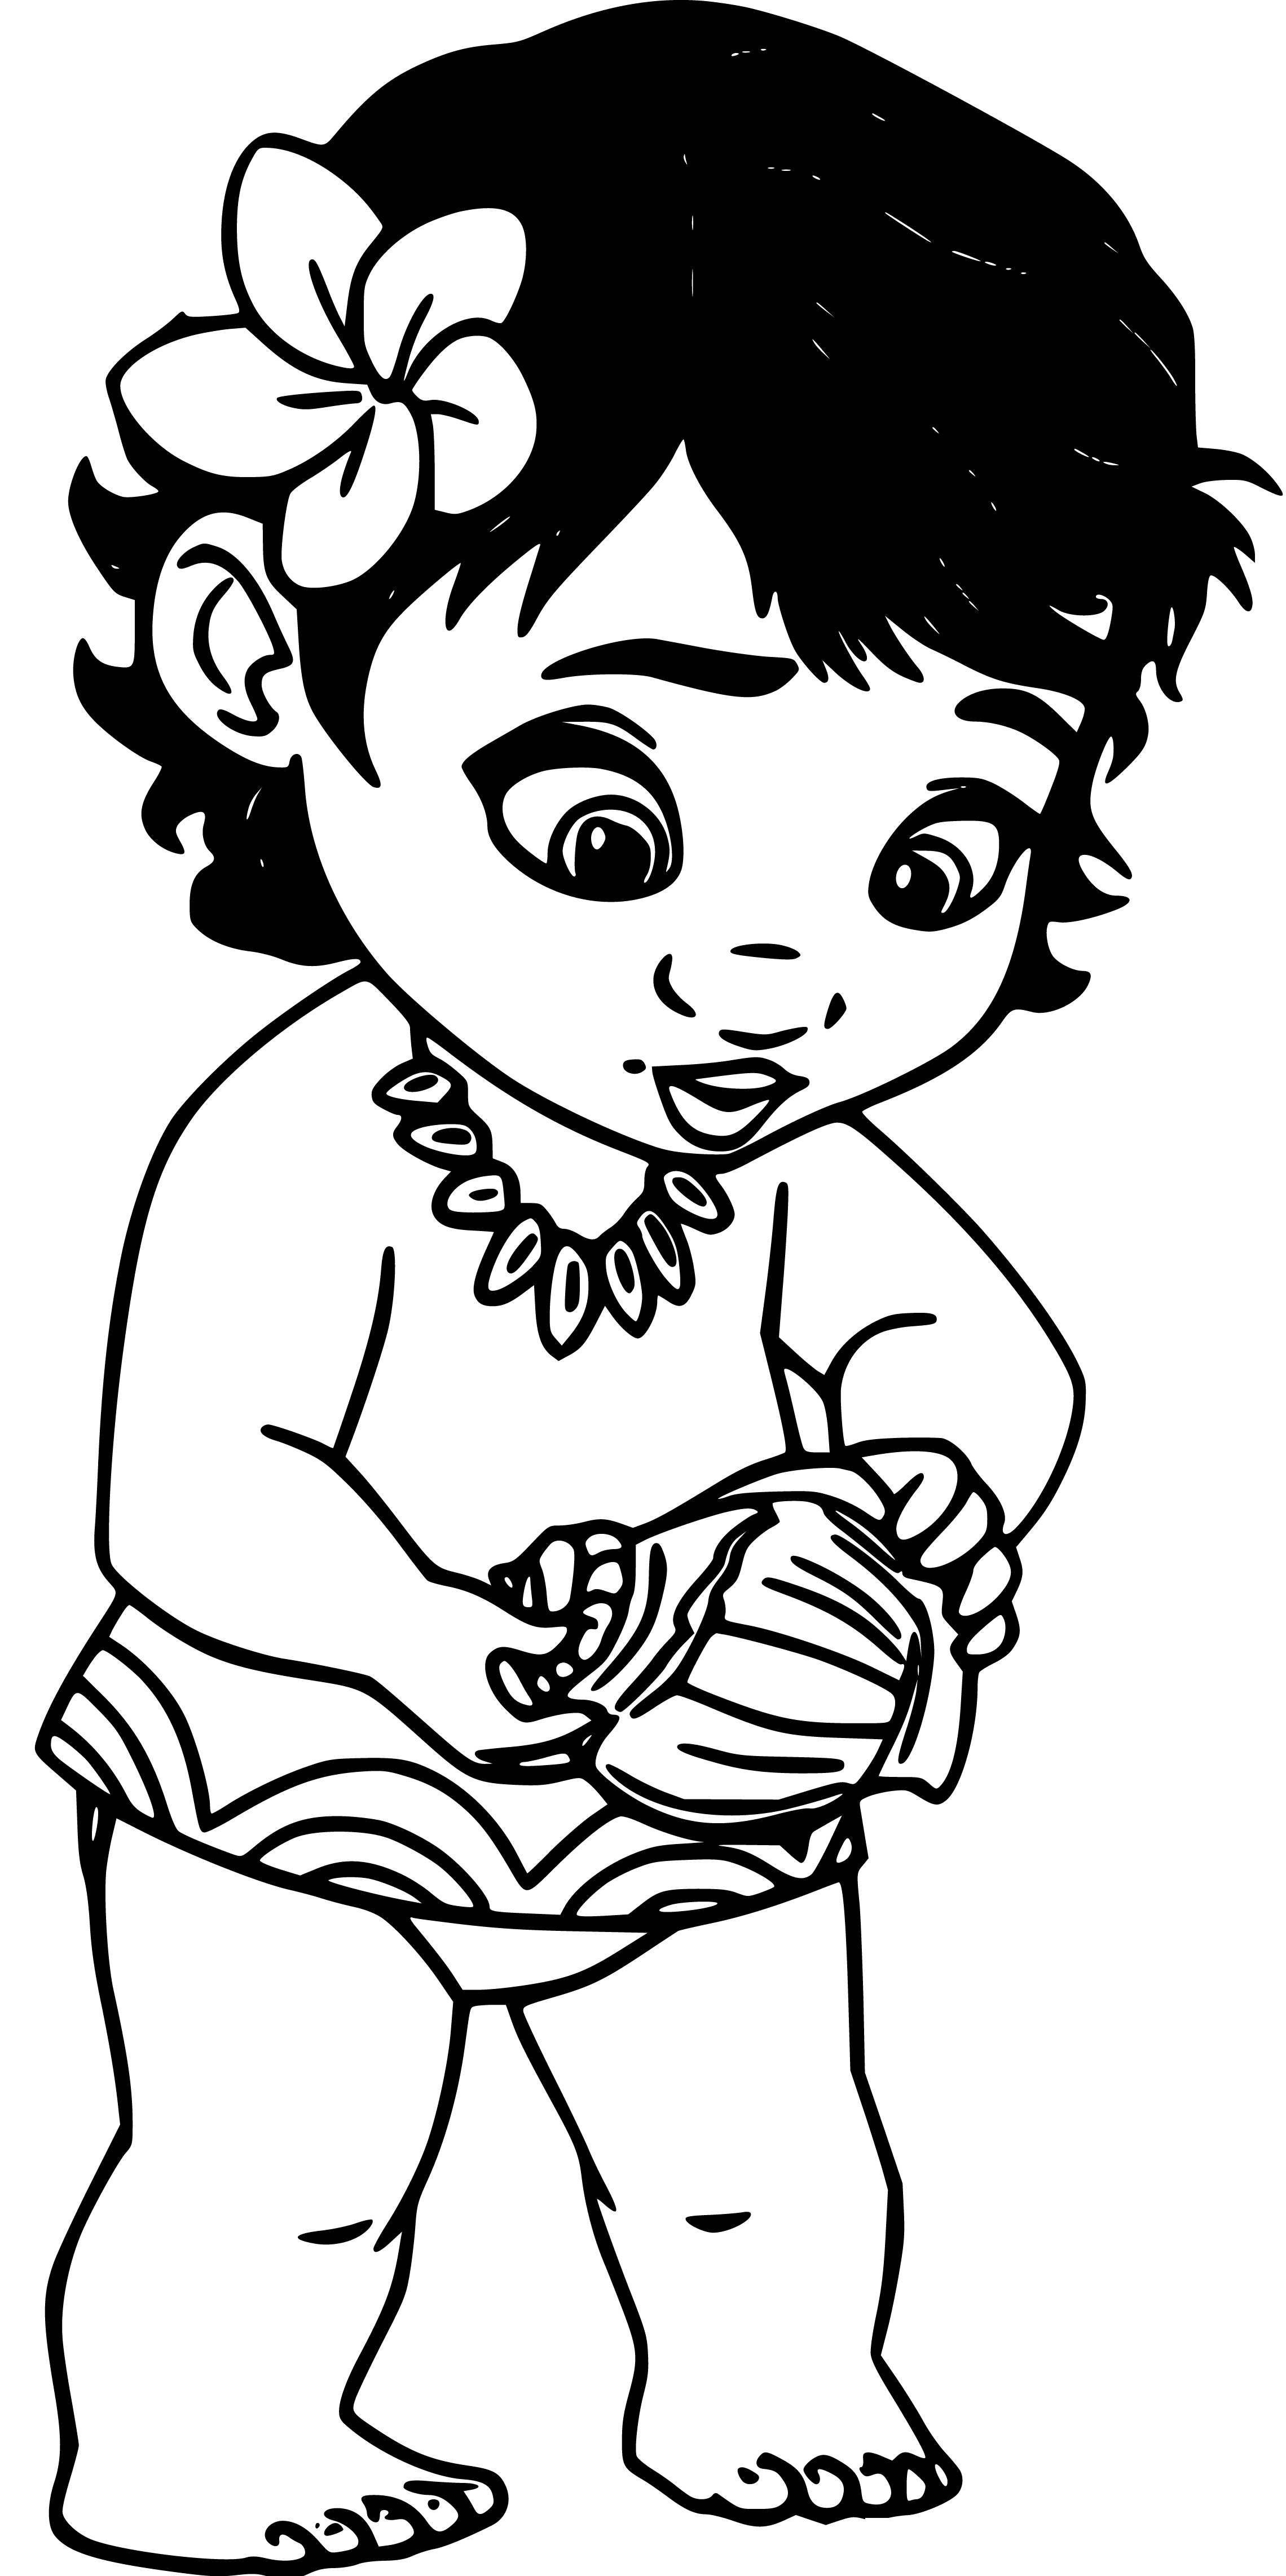 Toddler Moana Coloring Page for Kids - SheetalColor.com